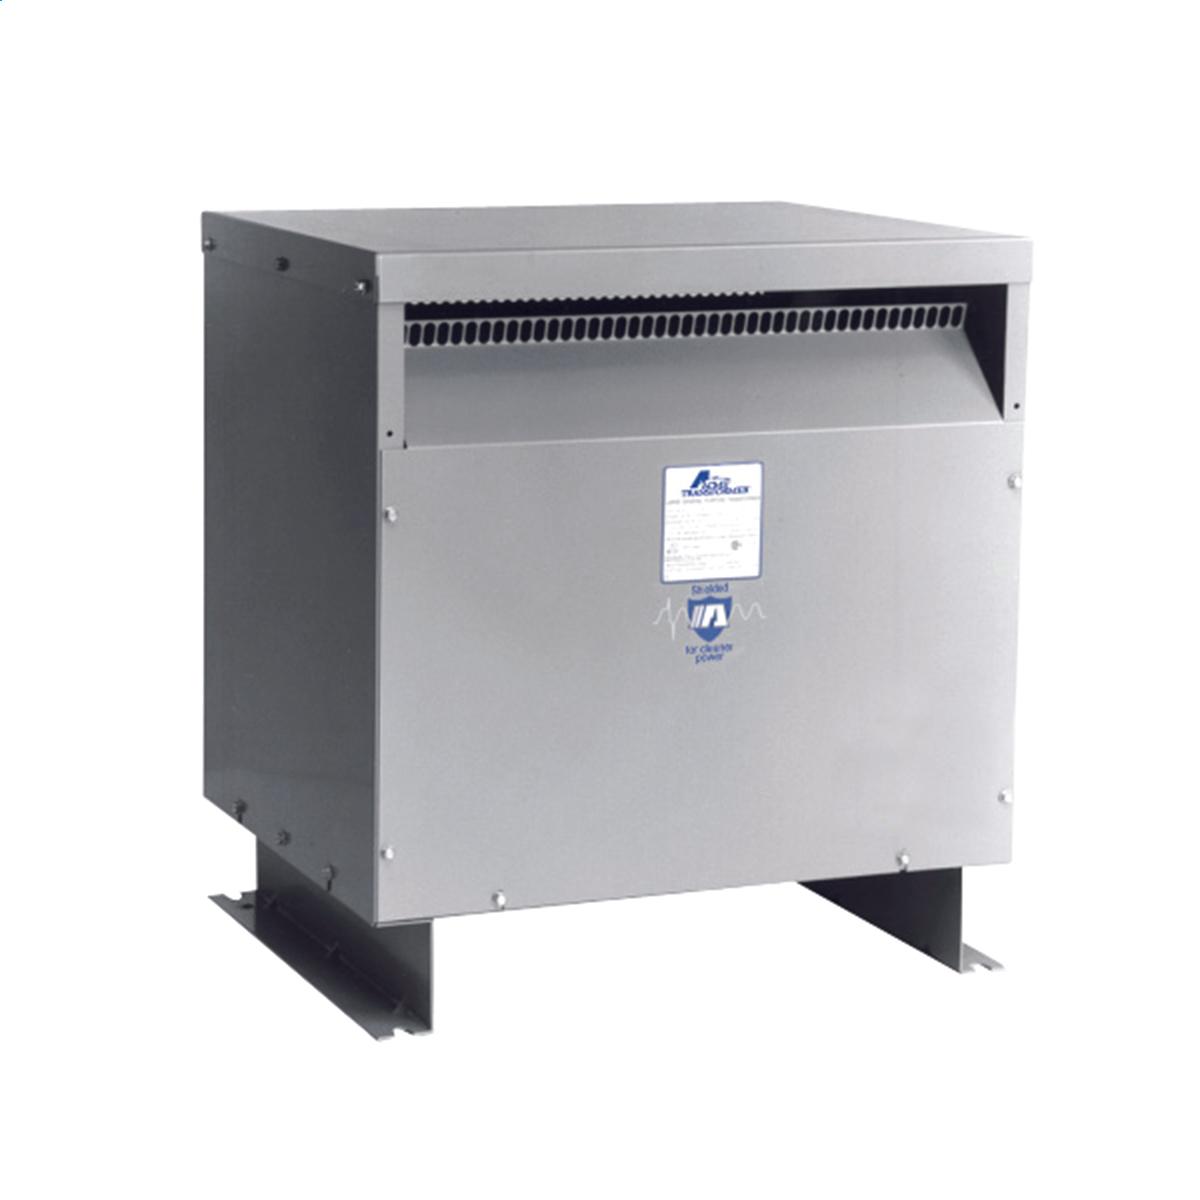 Hubbell WB015K09 Medium Voltage Transformer - Single Phase, 4800 - 600V, 15kVA  ; Lower operating cost over Liquid-filled ; No additional fireproofing or venting ; Long life expectancy ; Smaller, lighter easy to maintain